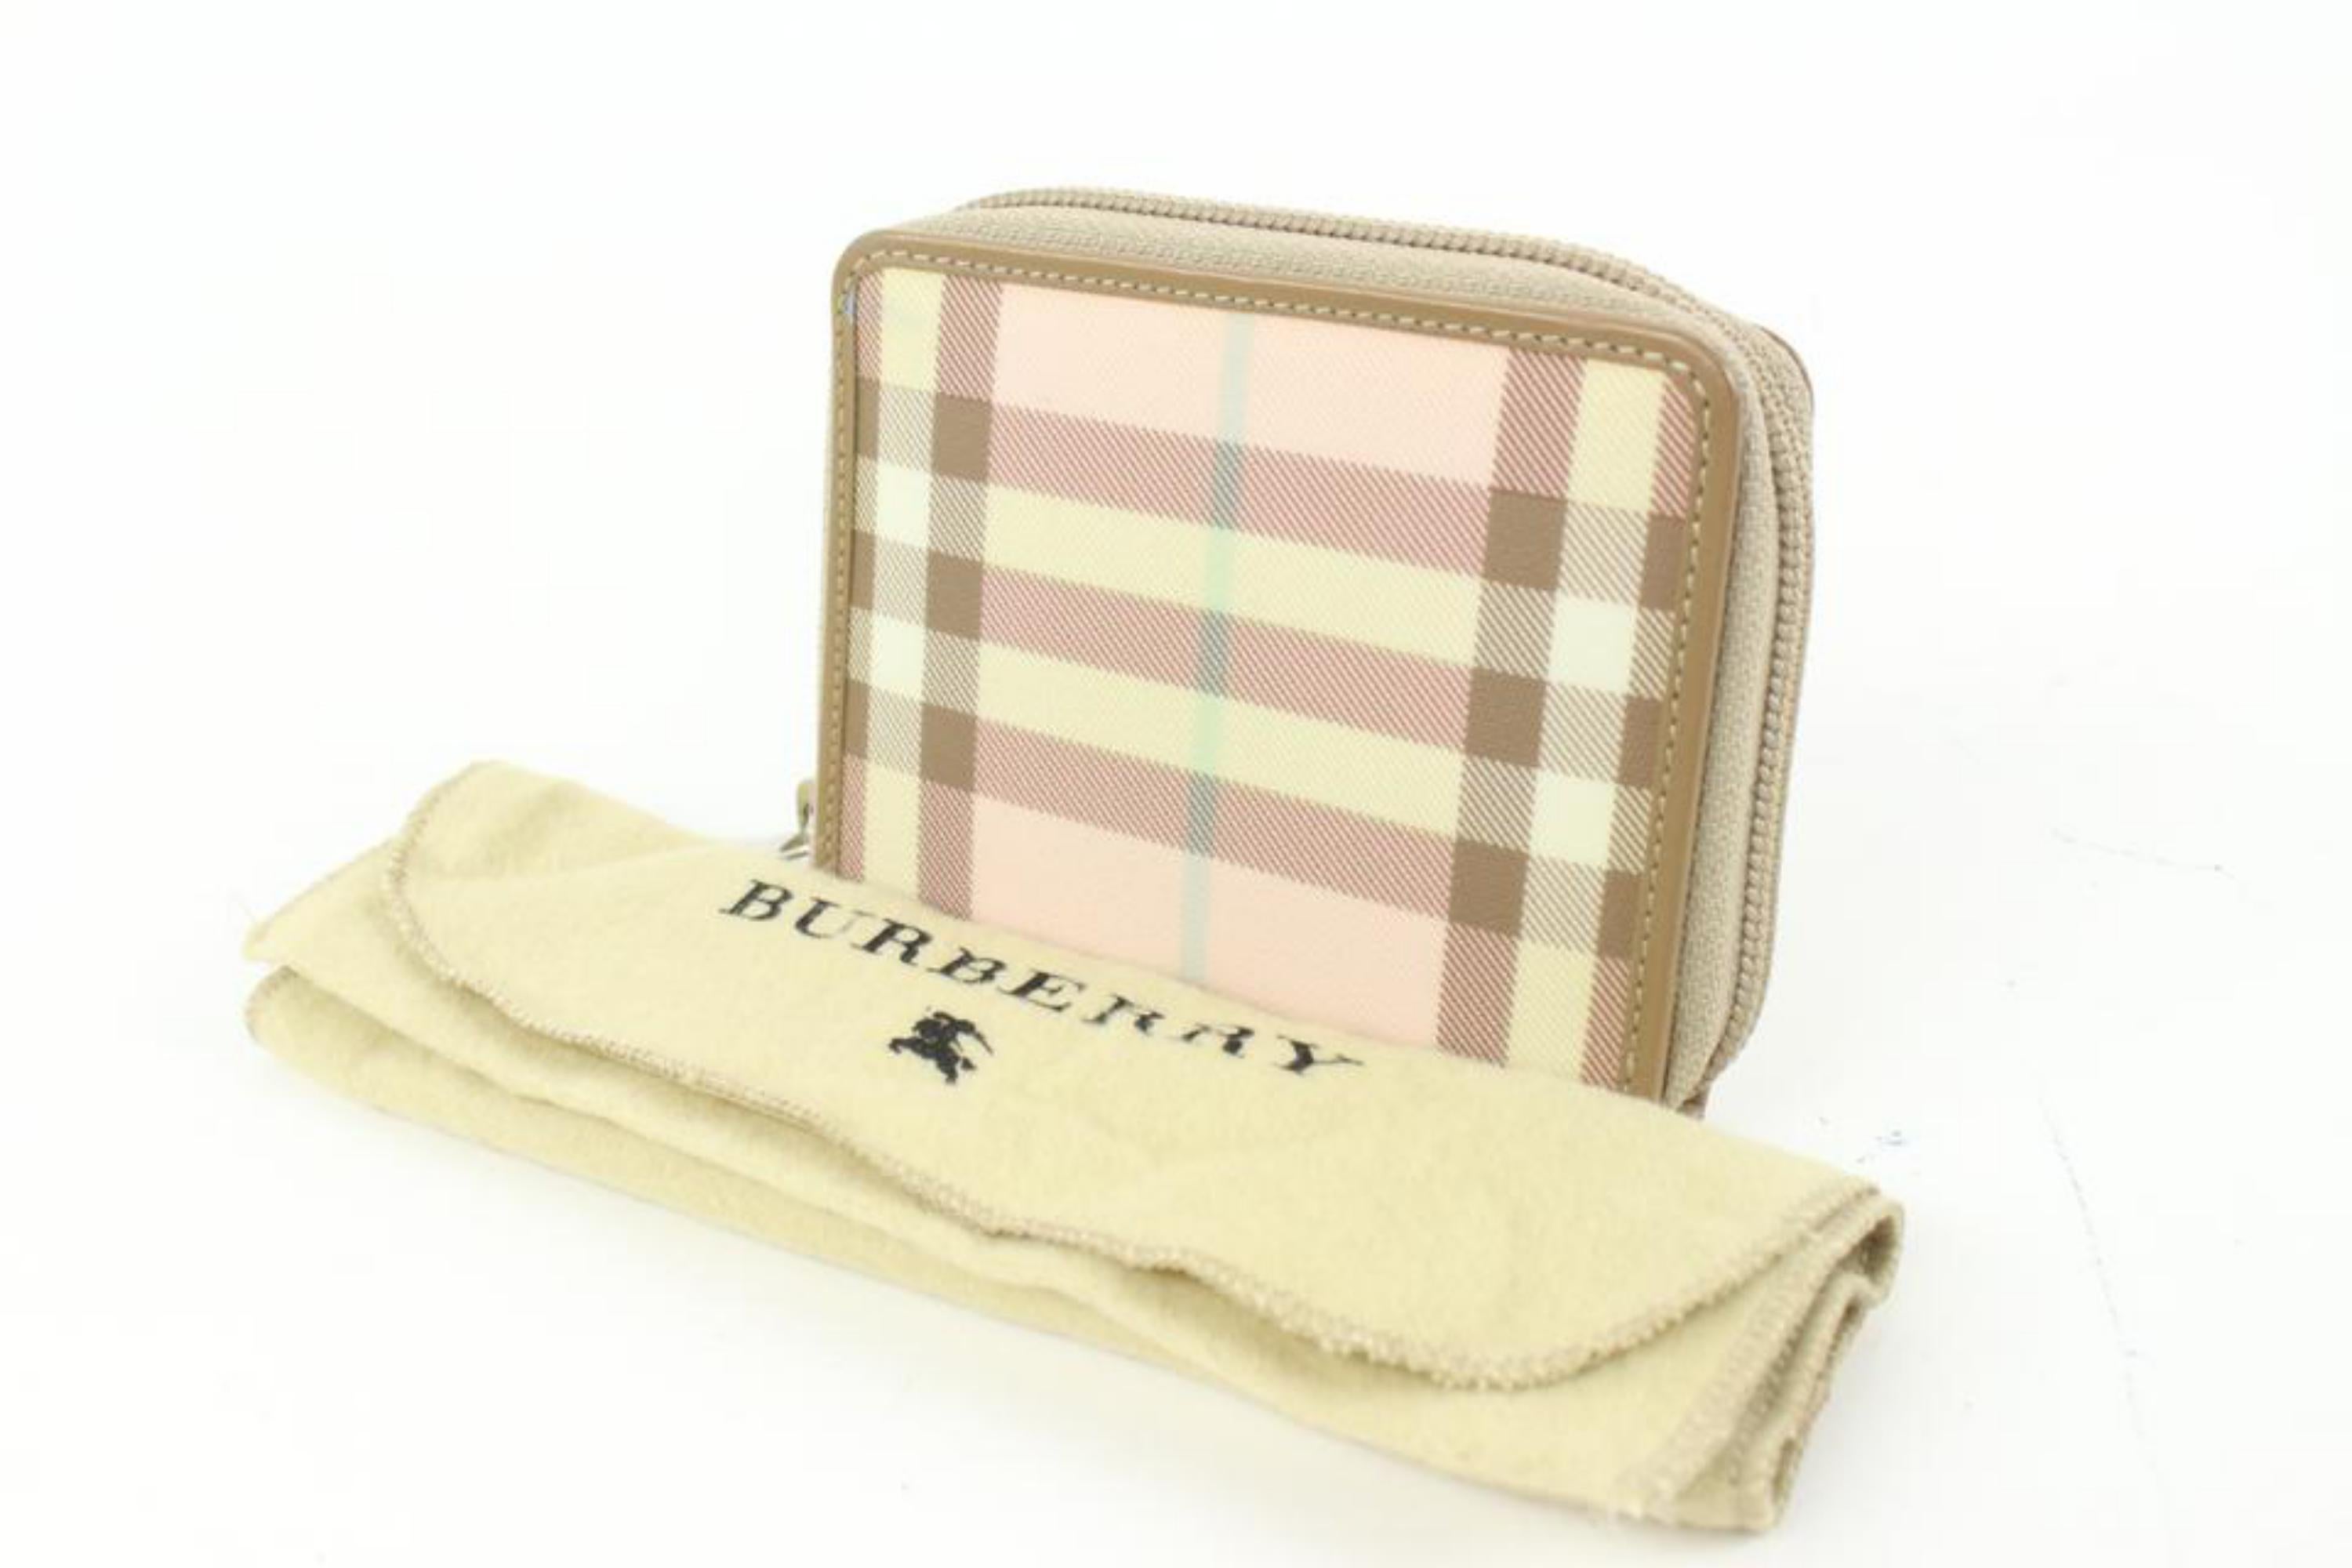 Burberry London Nova Pink Cotton Candy Check Compact Zip Wallet Zippy Around 56b414s
Made In: Italy
Measurements: Length:  4.2